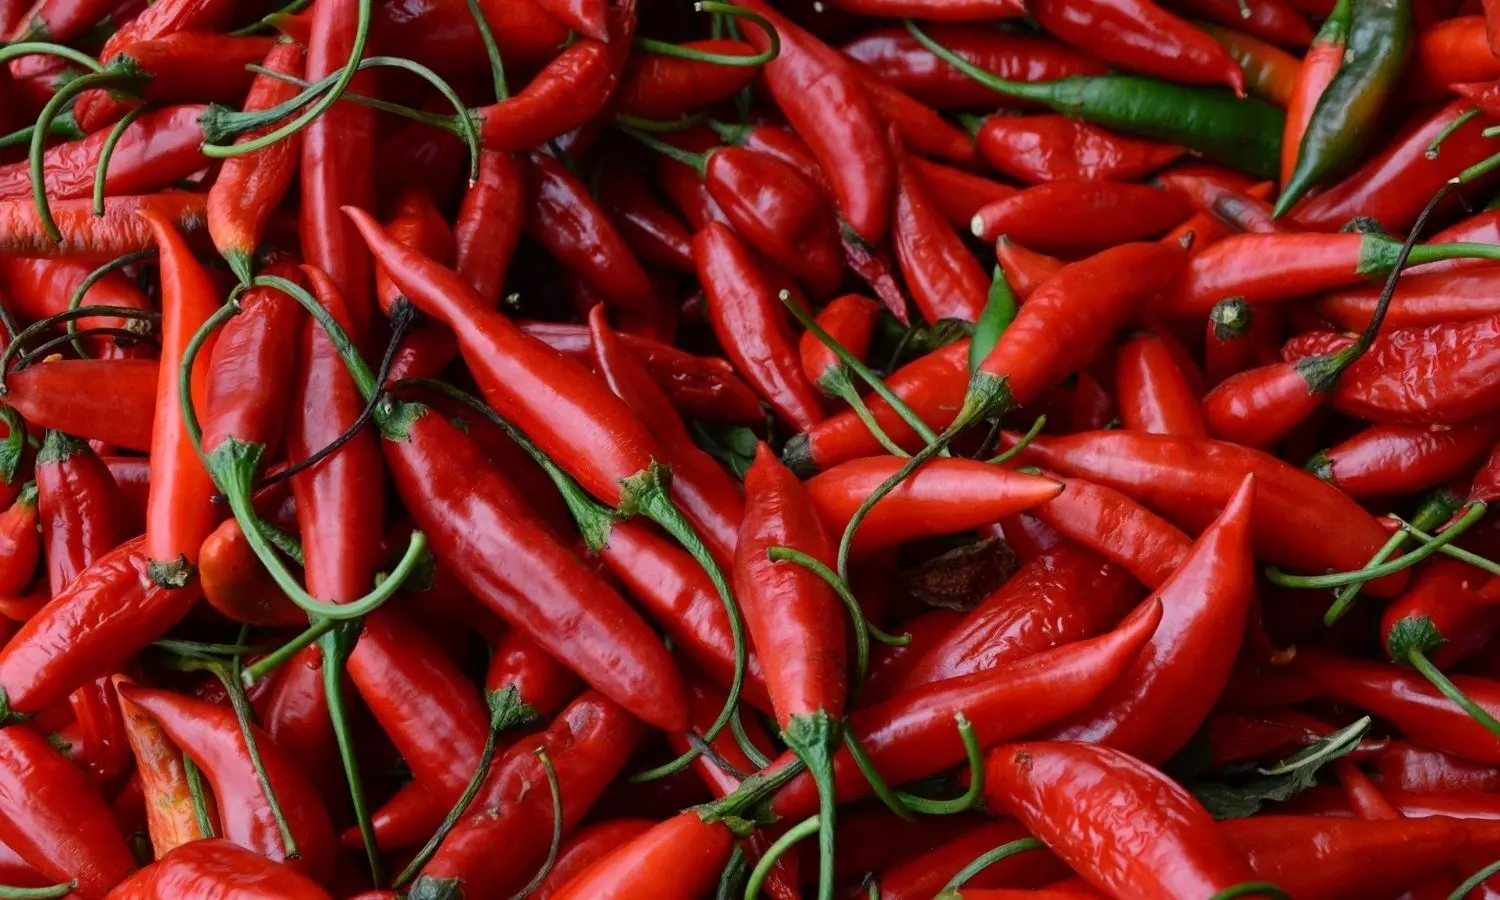 Chili pepper consumption may lower mortality related to CVD, cancer: Study